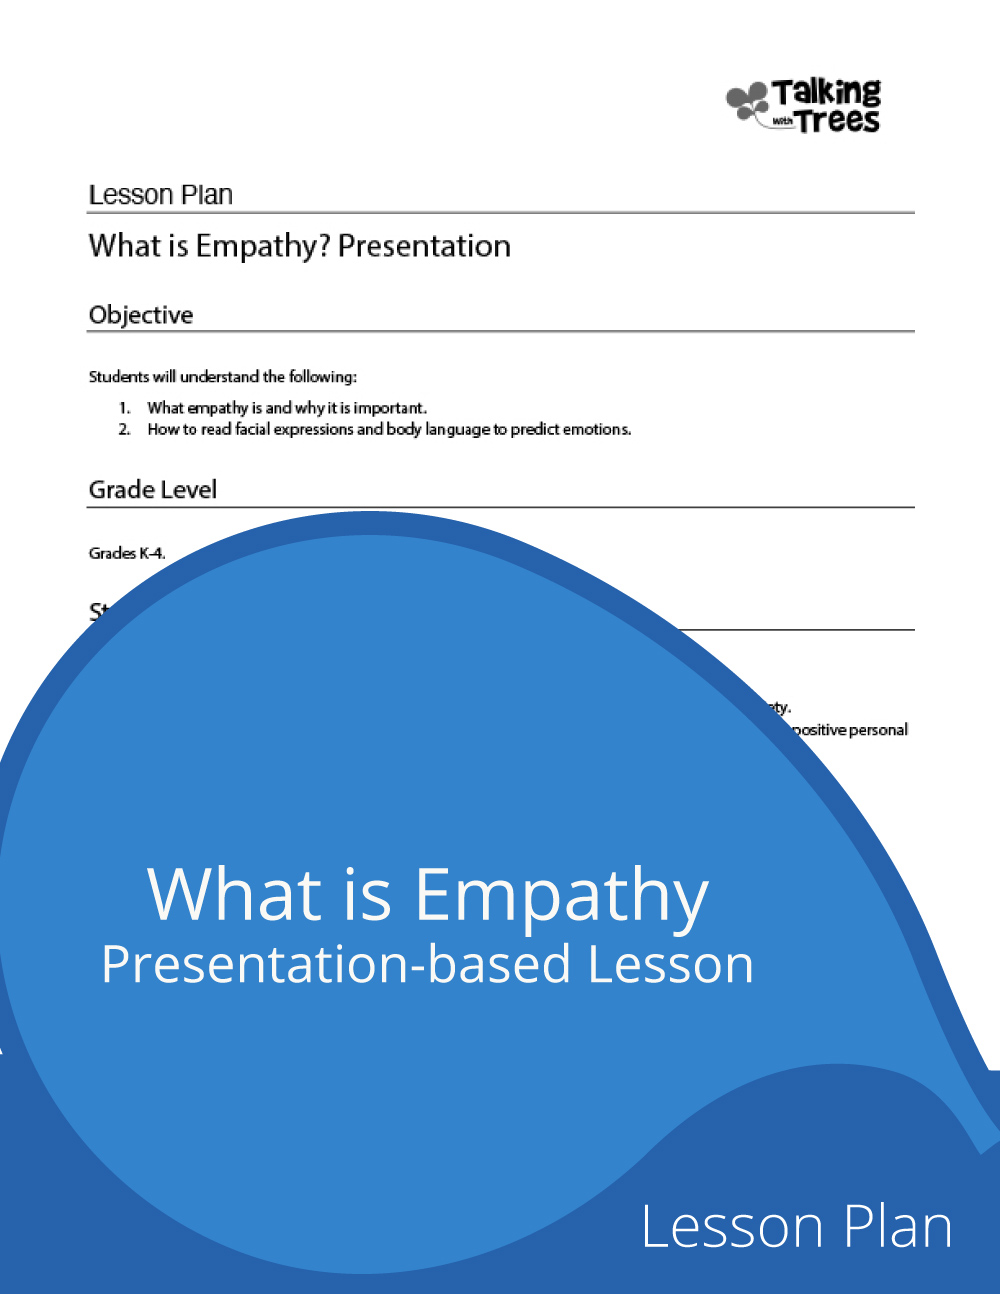 Empathy lesson plan for elementary social emotional learning